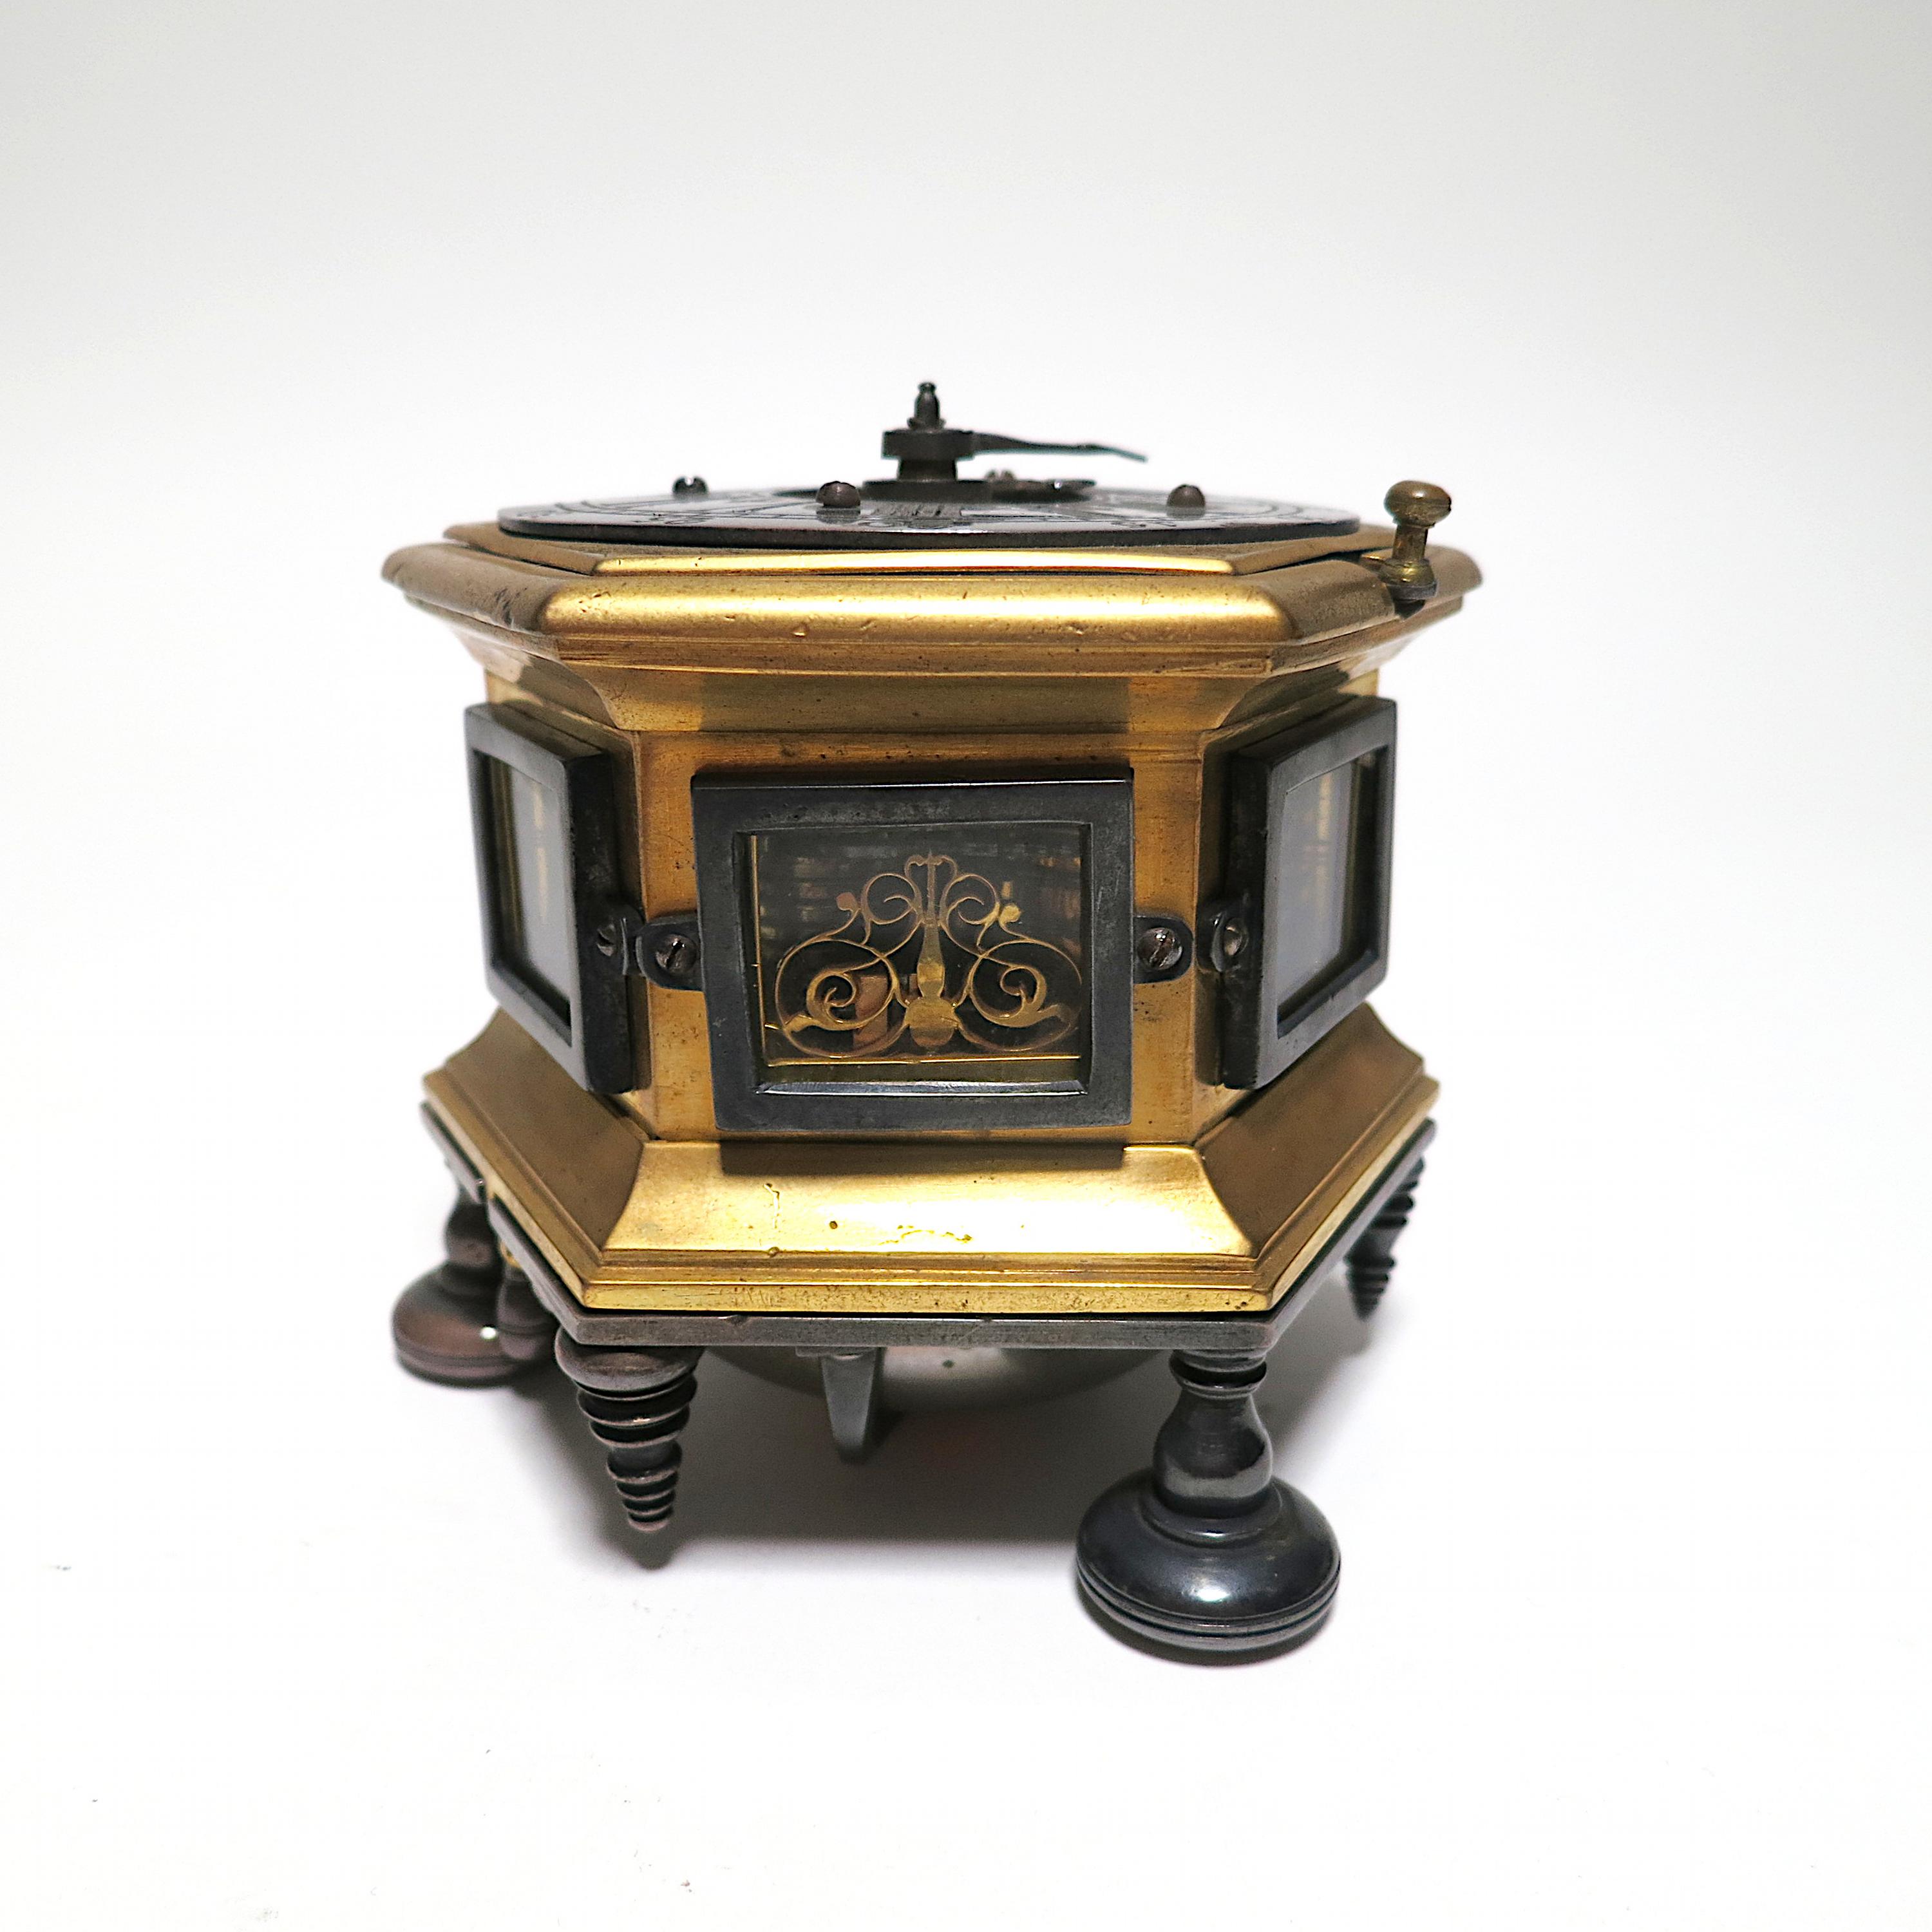 HEXAGONAL BAROQUE TABLE CLOCK MADE OF GILT BRONZE WITH RESIDUES OF SILVER PLATING AND GLASS. - Image 5 of 10